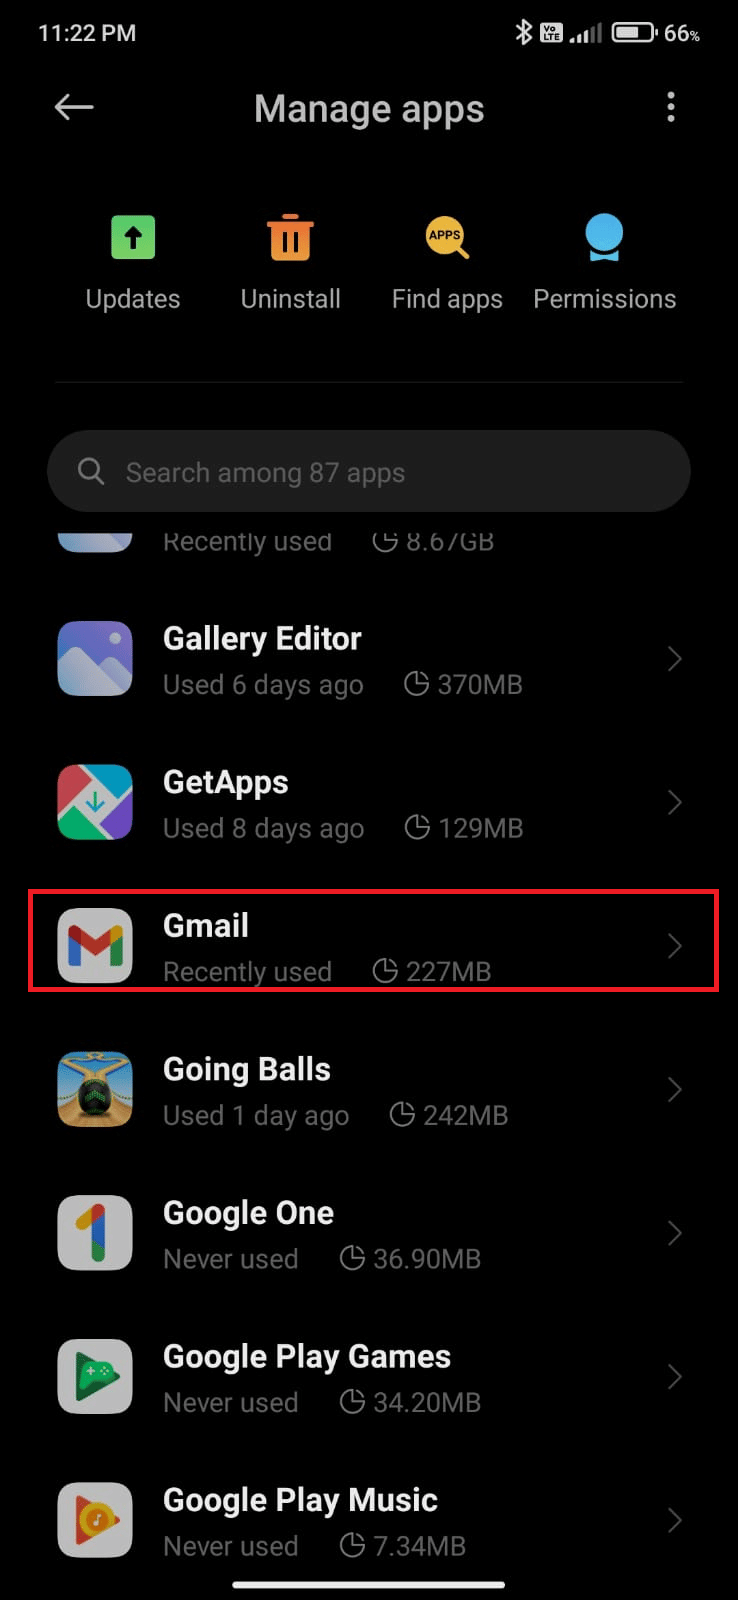 Then, tap on Manage apps followed by Gmail | Why Does My Email Say Queued